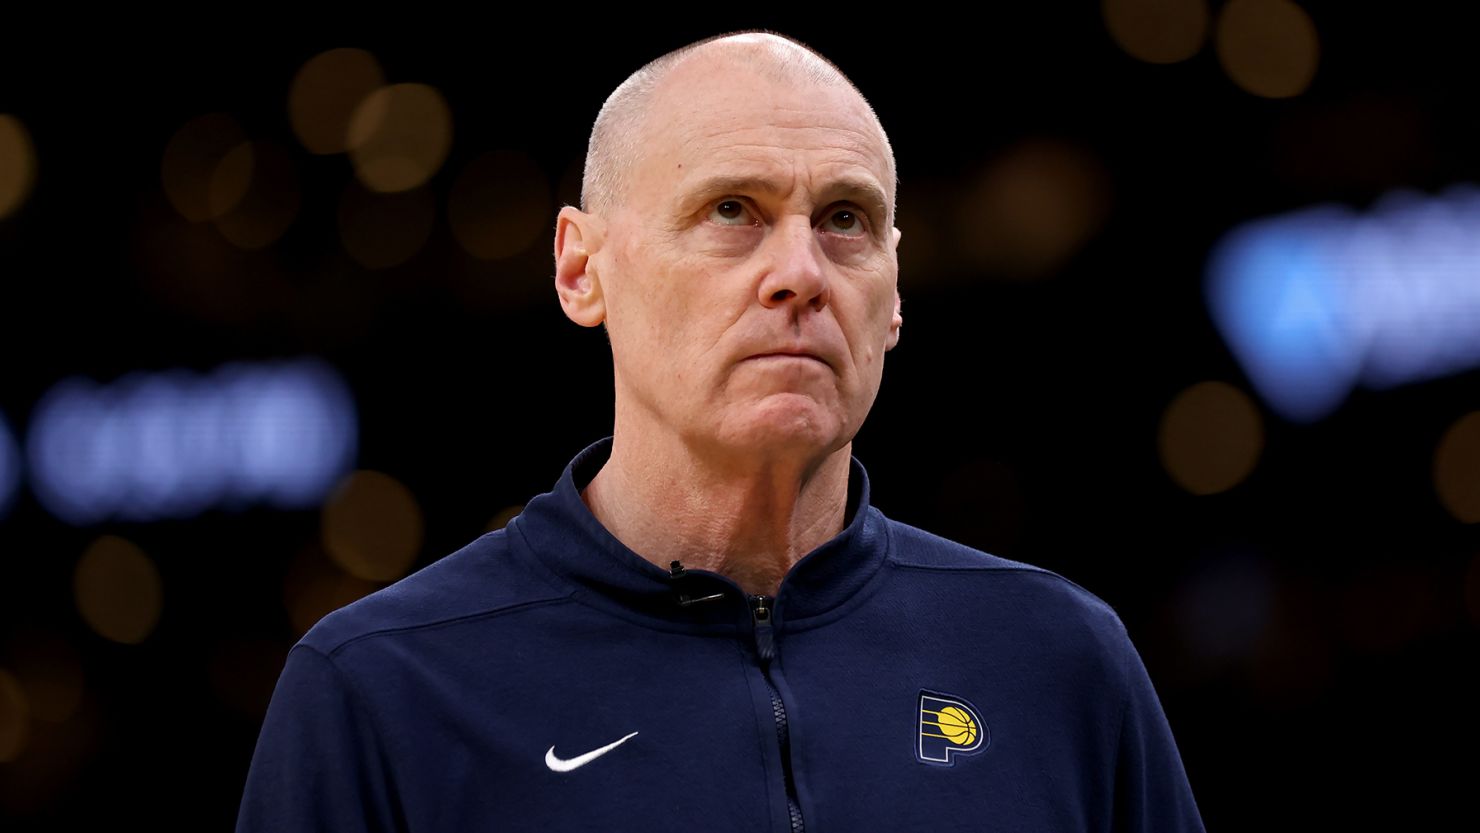 Indiana Pacers head coach Rick Carlisle said he should have called a timeout in the final seconds of regulation time.